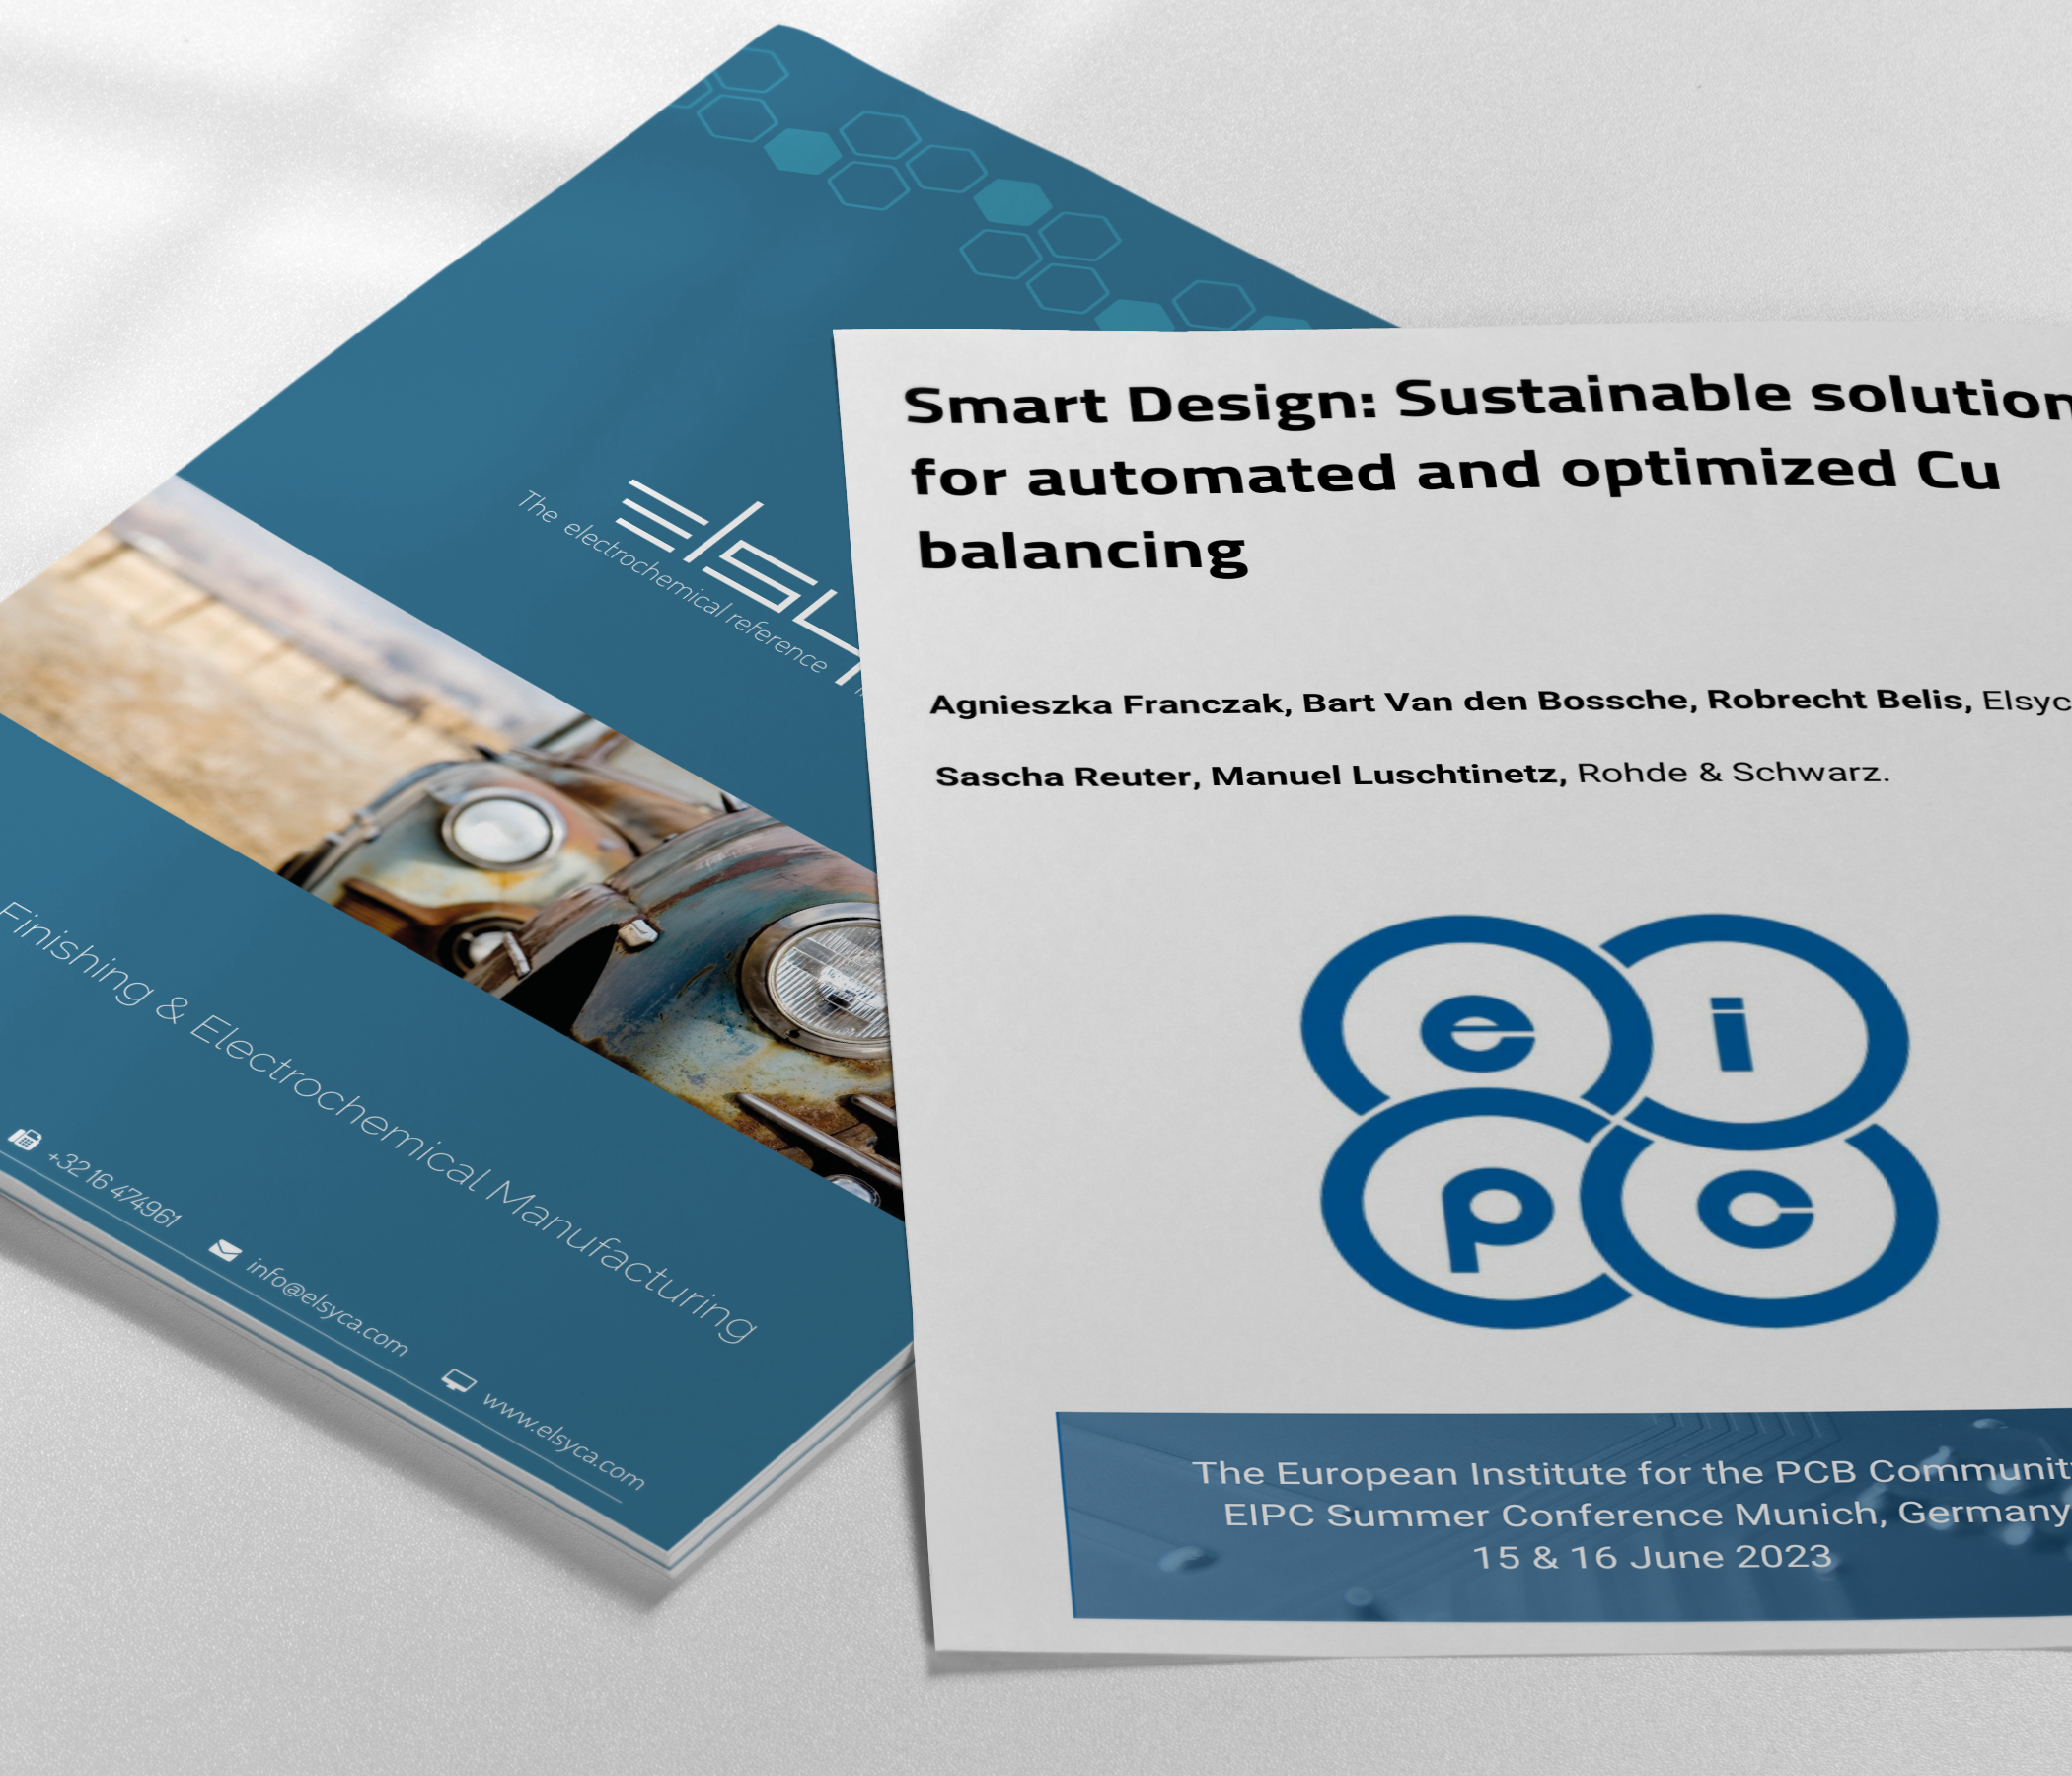 Smart Design: Sustainable solution for automated and optimized Cu balancing